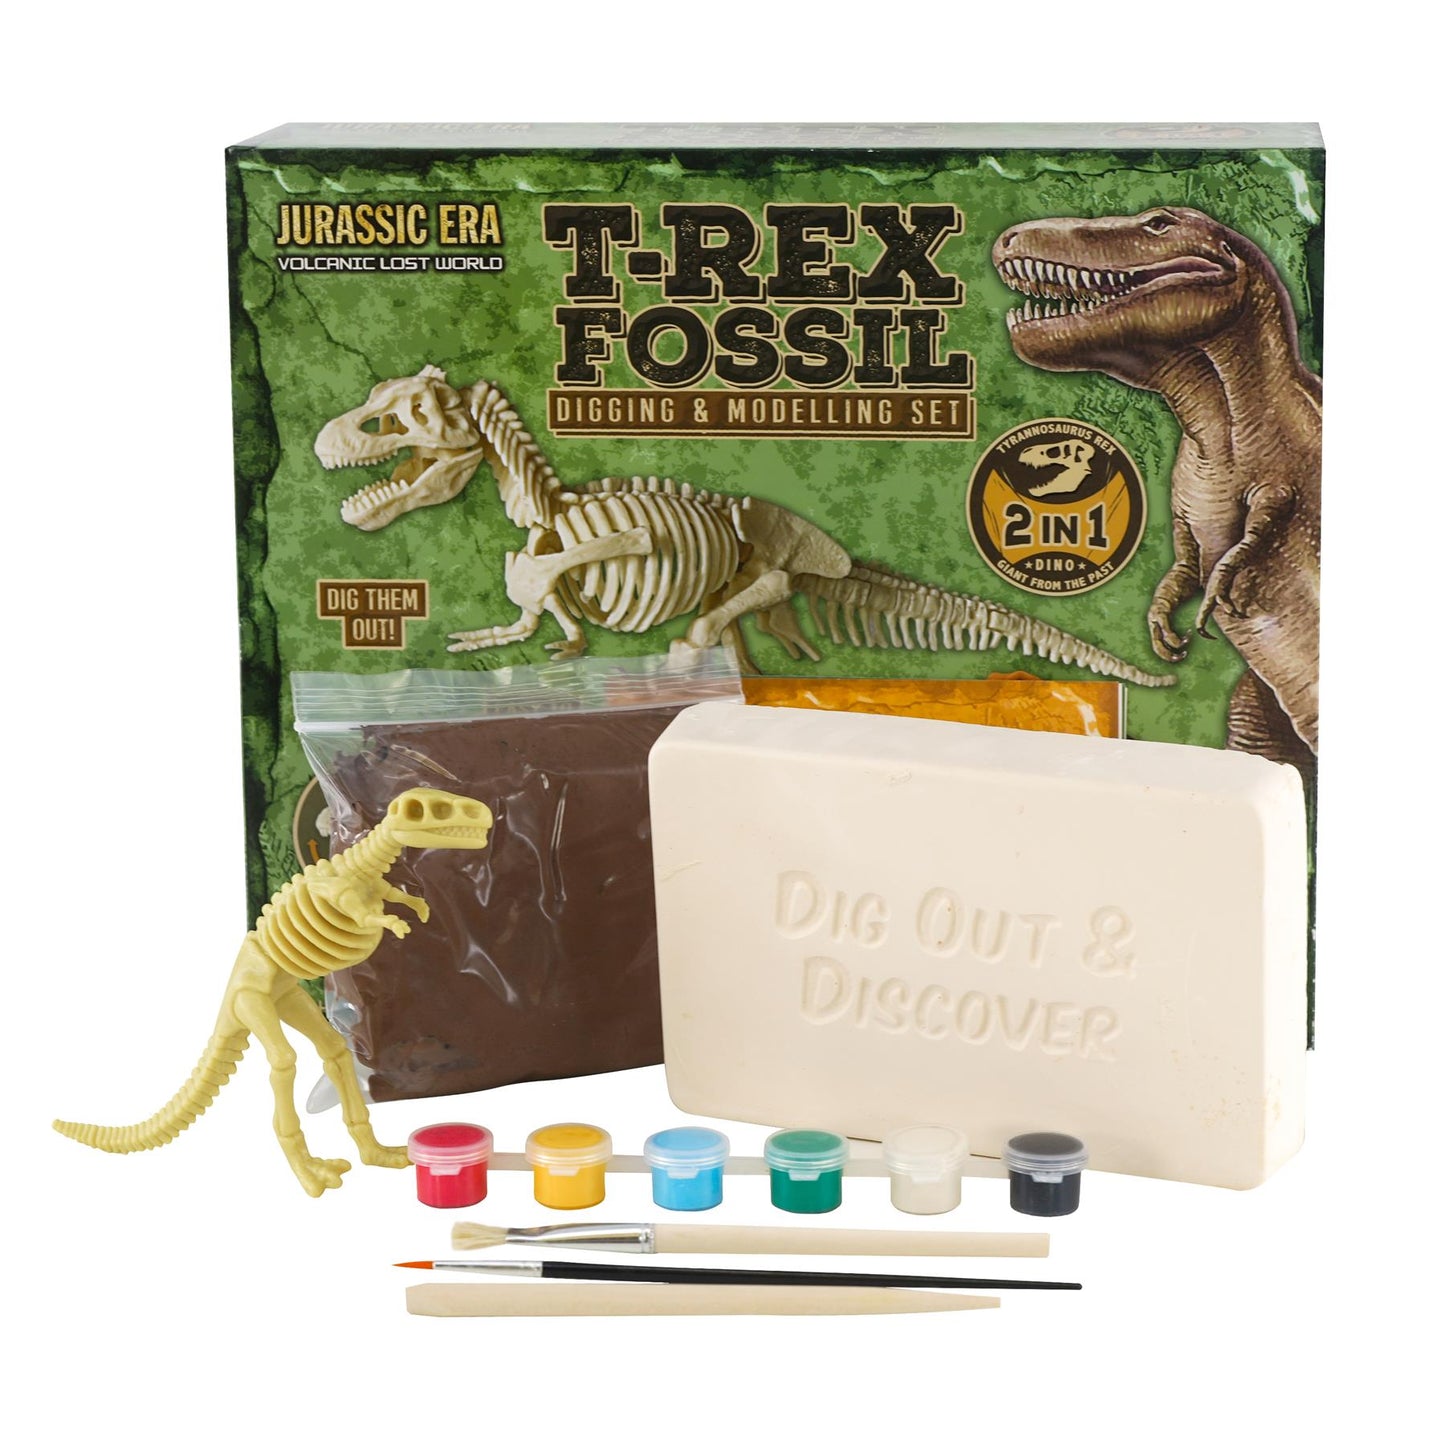 2-in-1 Fossil Excavation Kit by The Magic Toy Shop - UKBuyZone